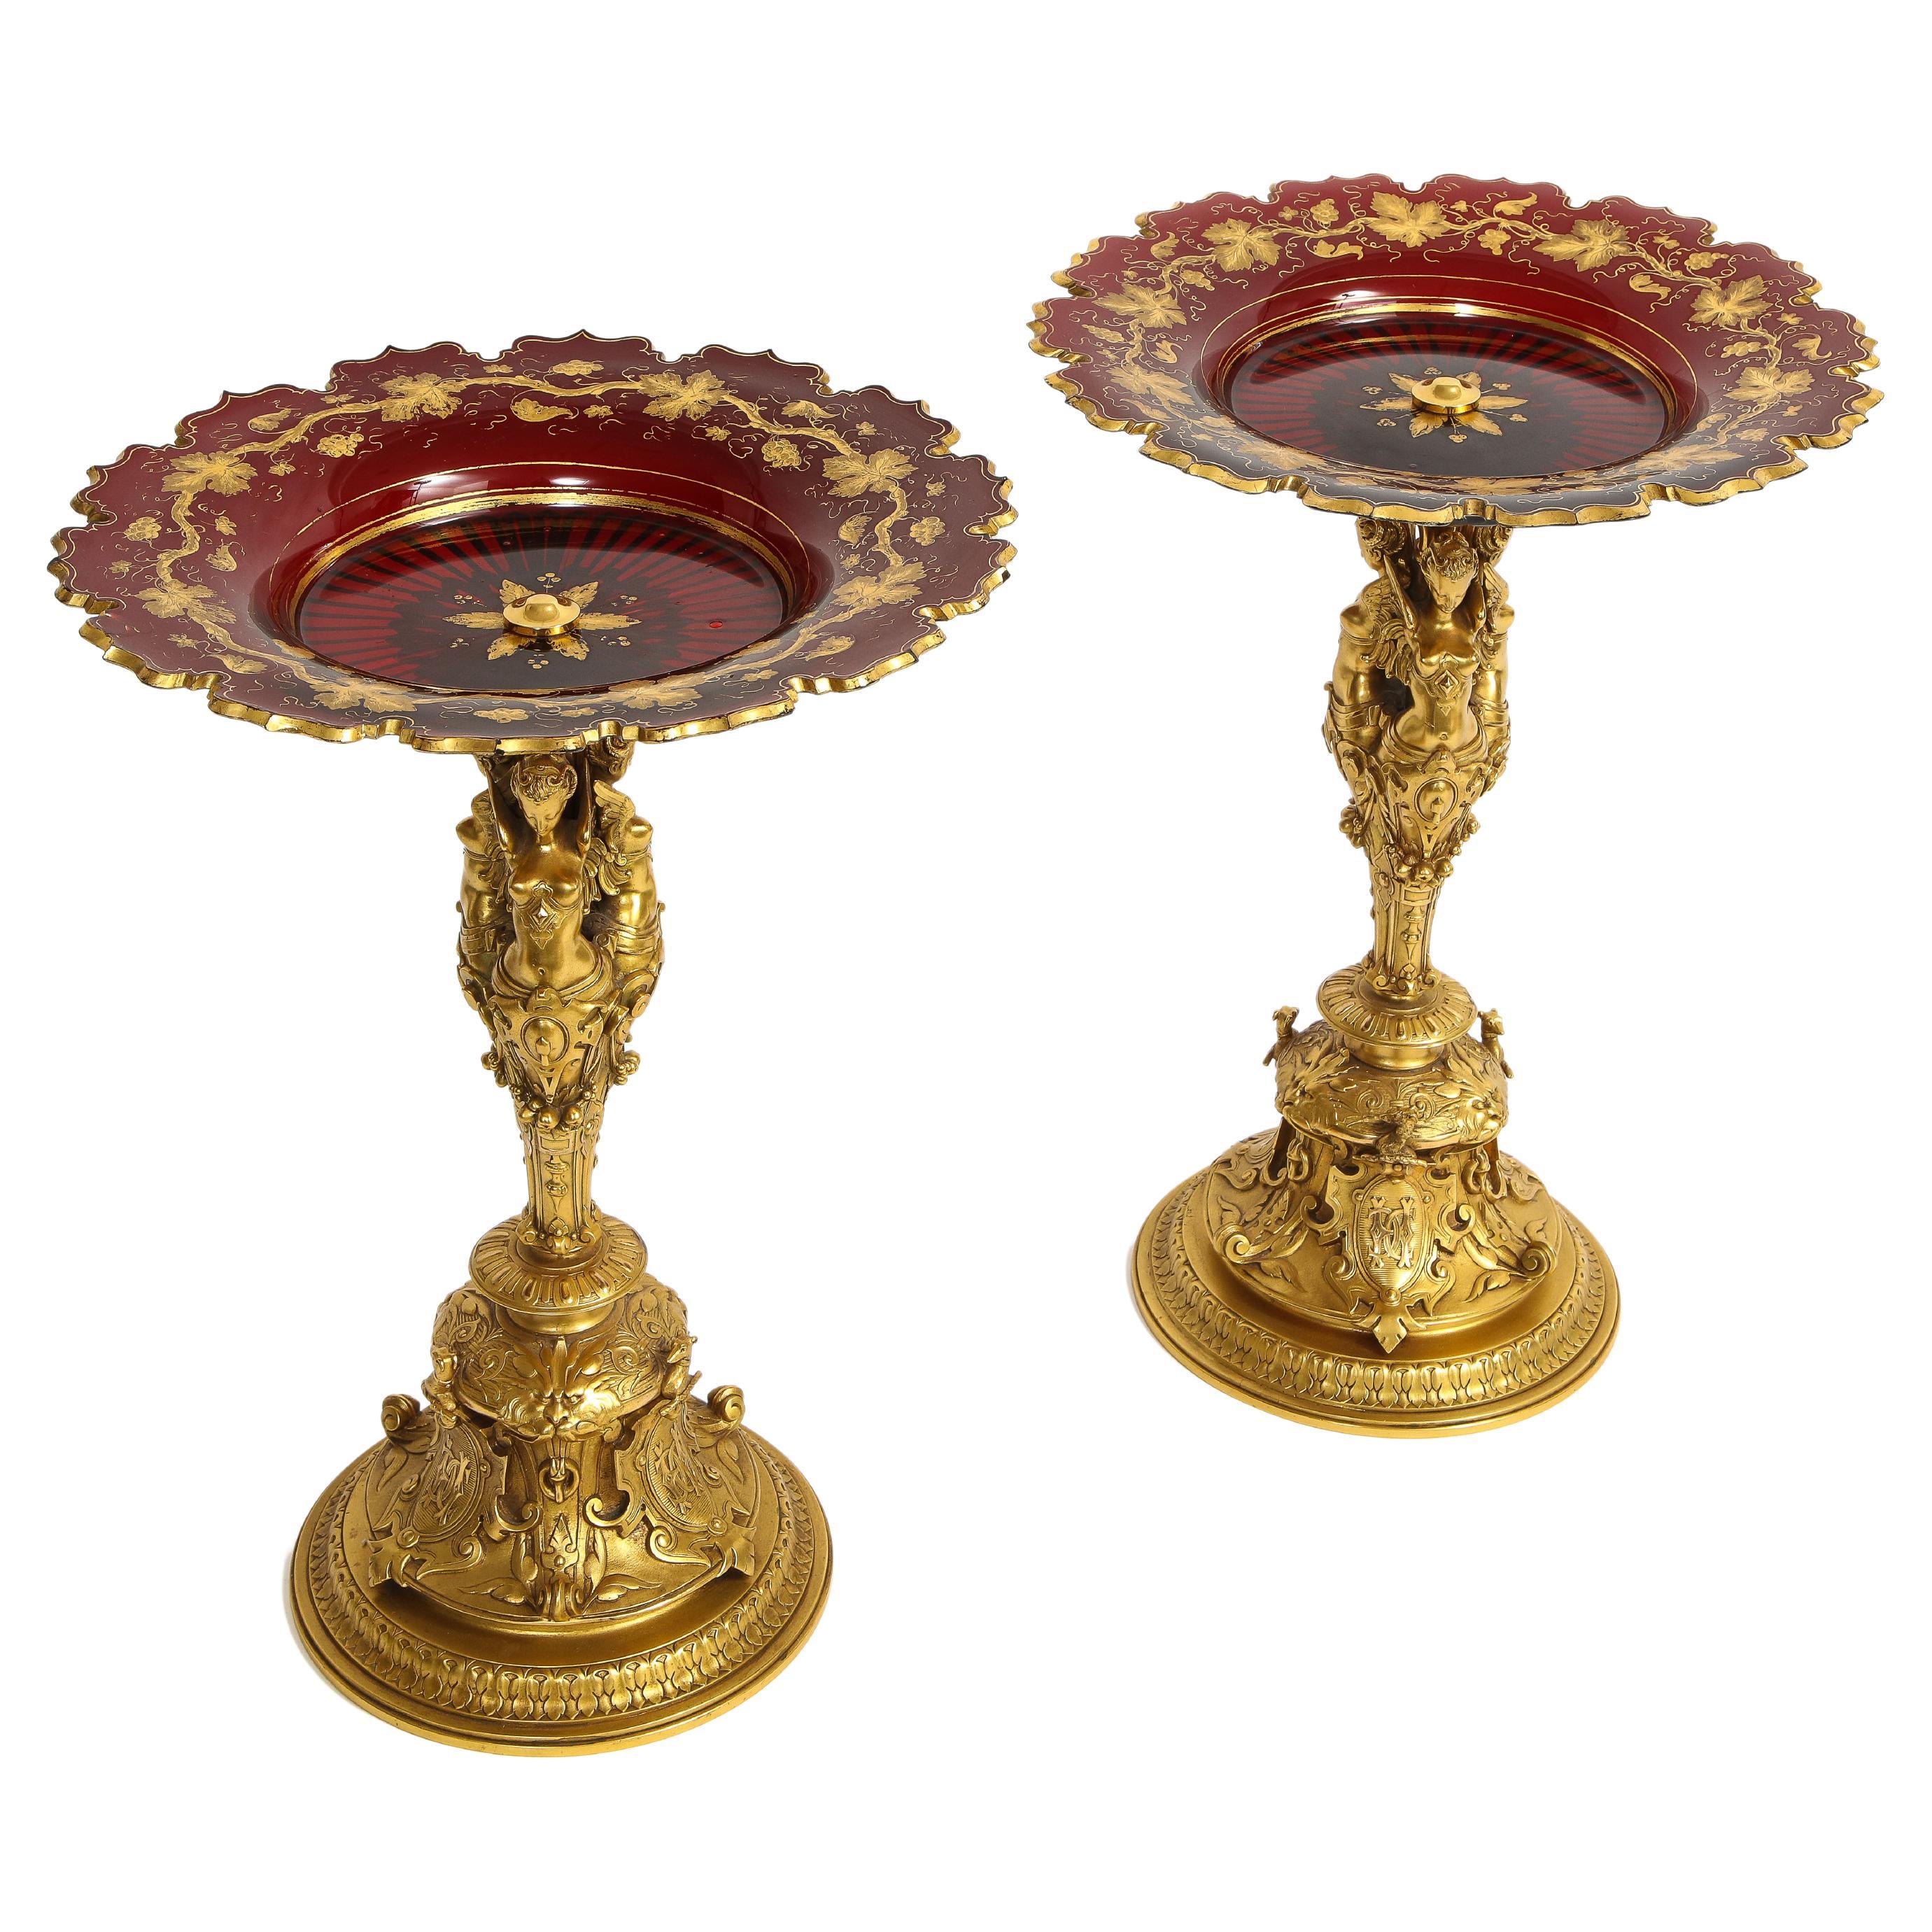 Pair French 19th C. Louis XVI Style Red Baccarat Crystal Ormolu Mounted Tazzas For Sale